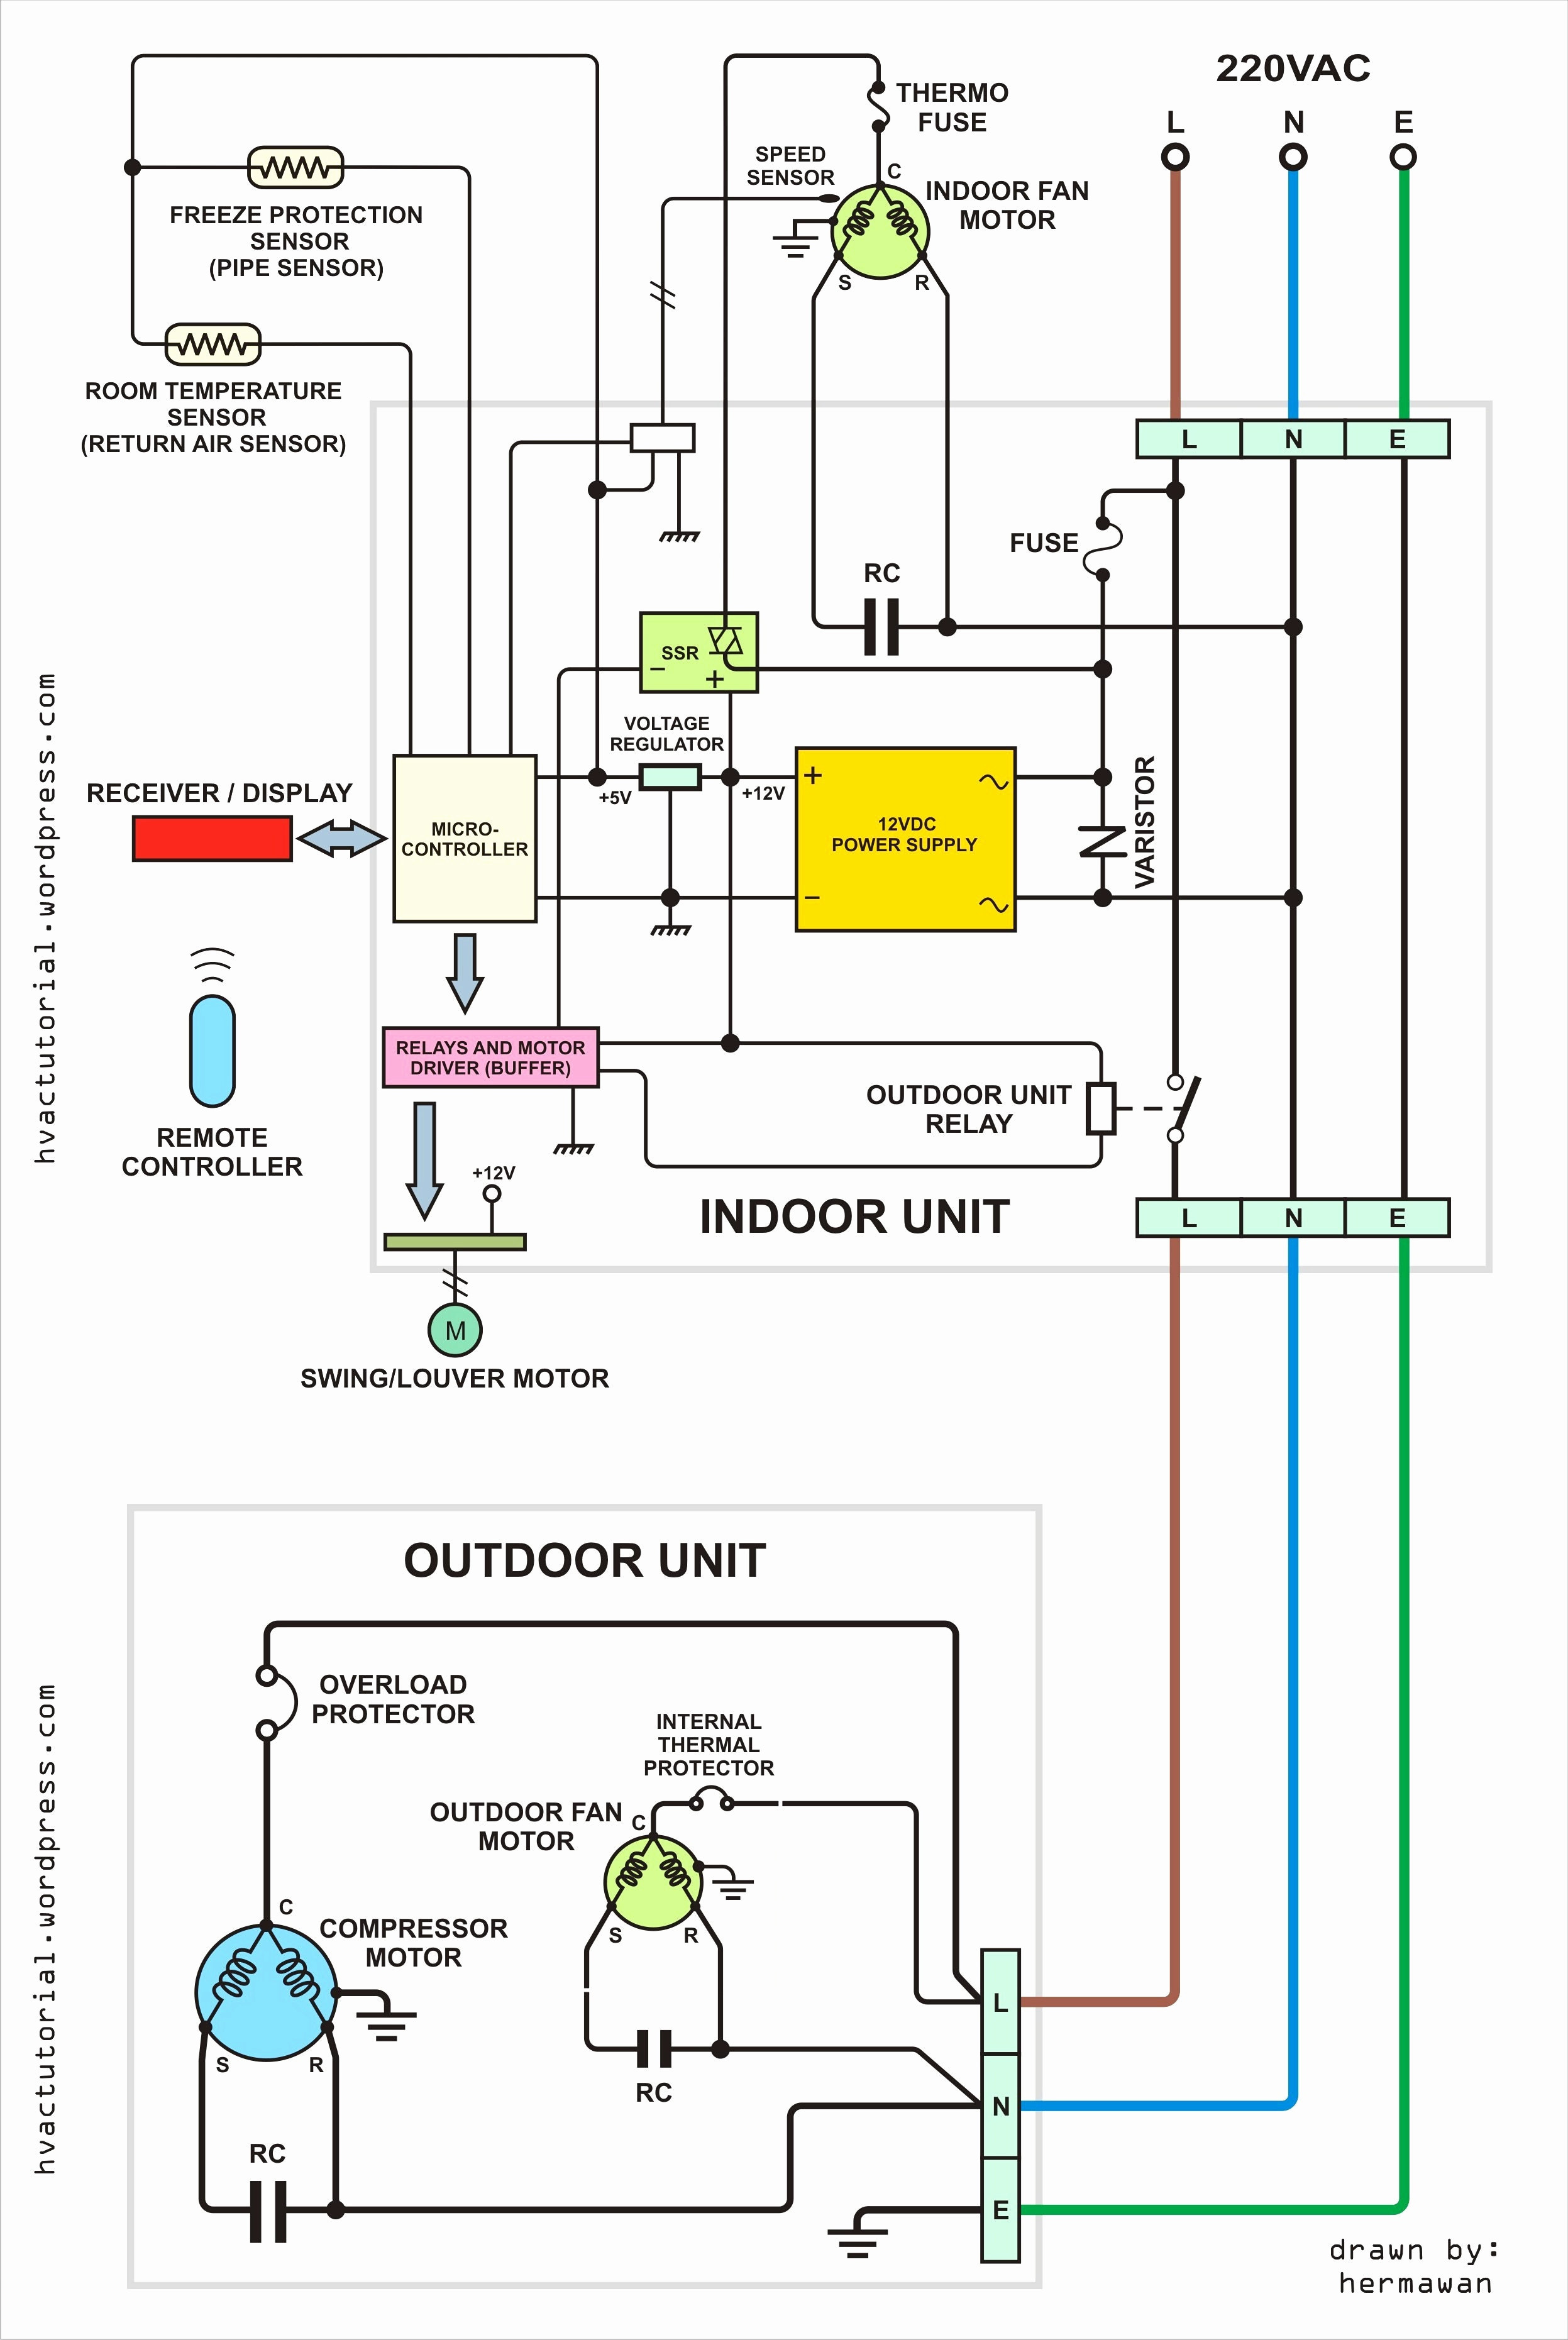 Air Conditioner Wiring Diagram Pdf | Switch Wiring Diagram Free - Ac Wiring Diagram Pdf